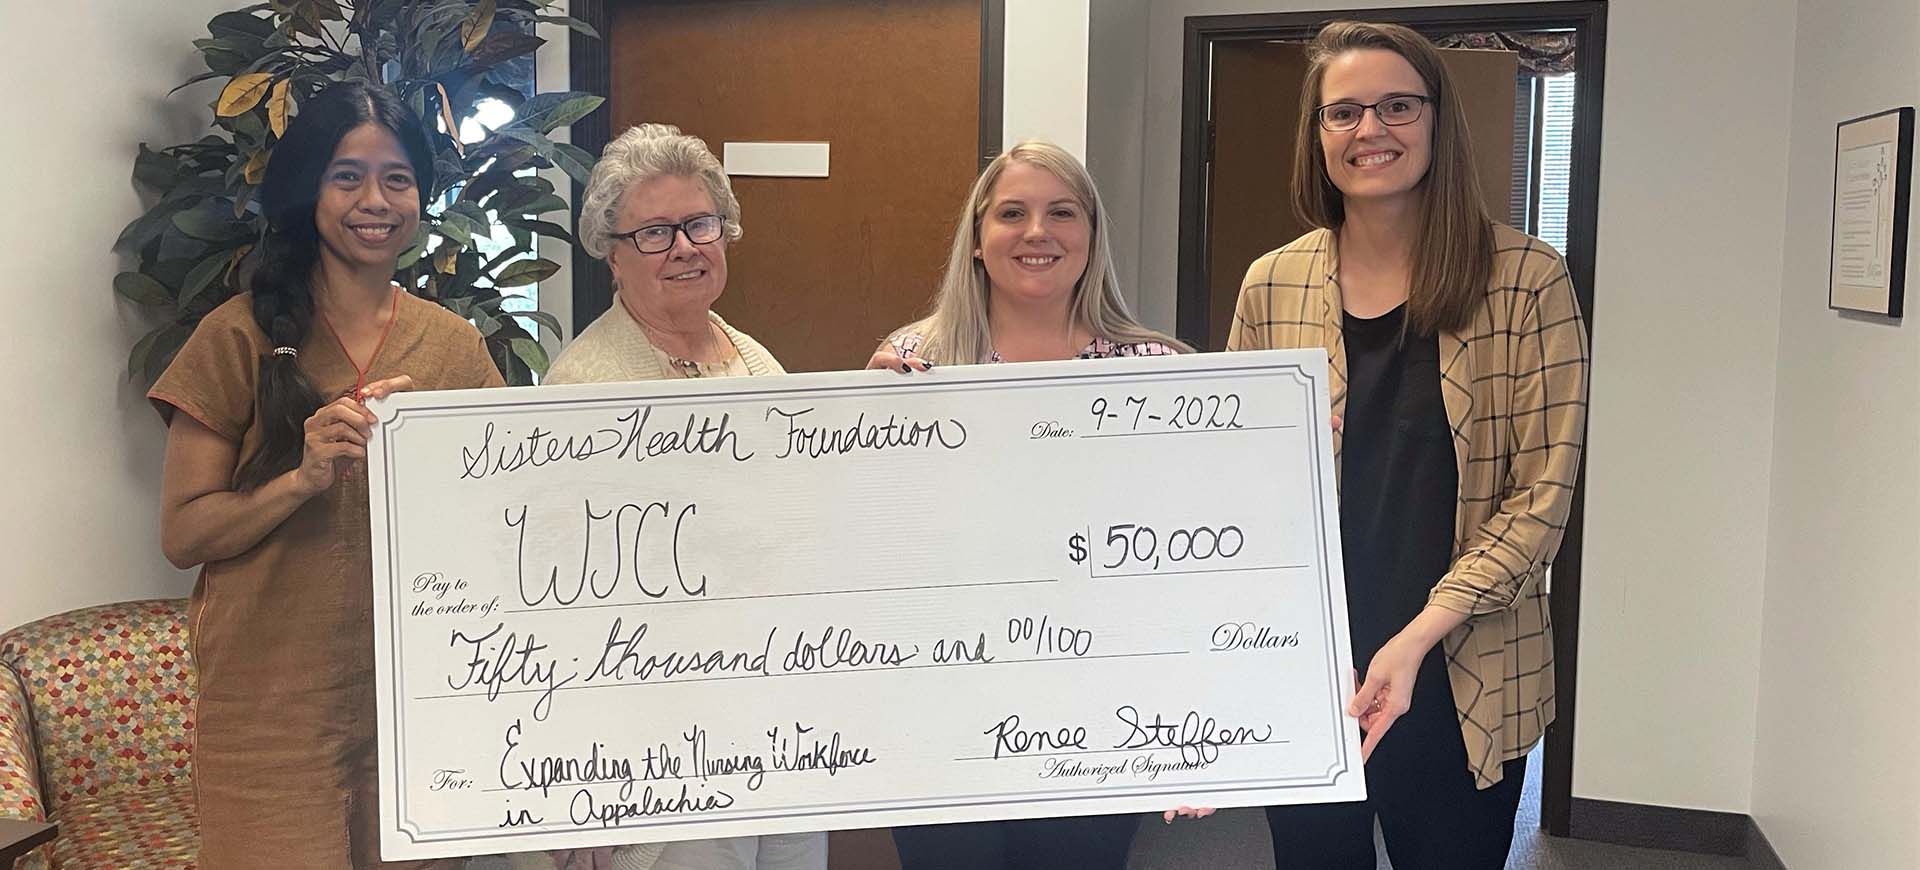 In support of the advancement of the nursing workforce in Appalachia, Sisters Health Foundation has awarded Washington State Community College a $50,000 grant.